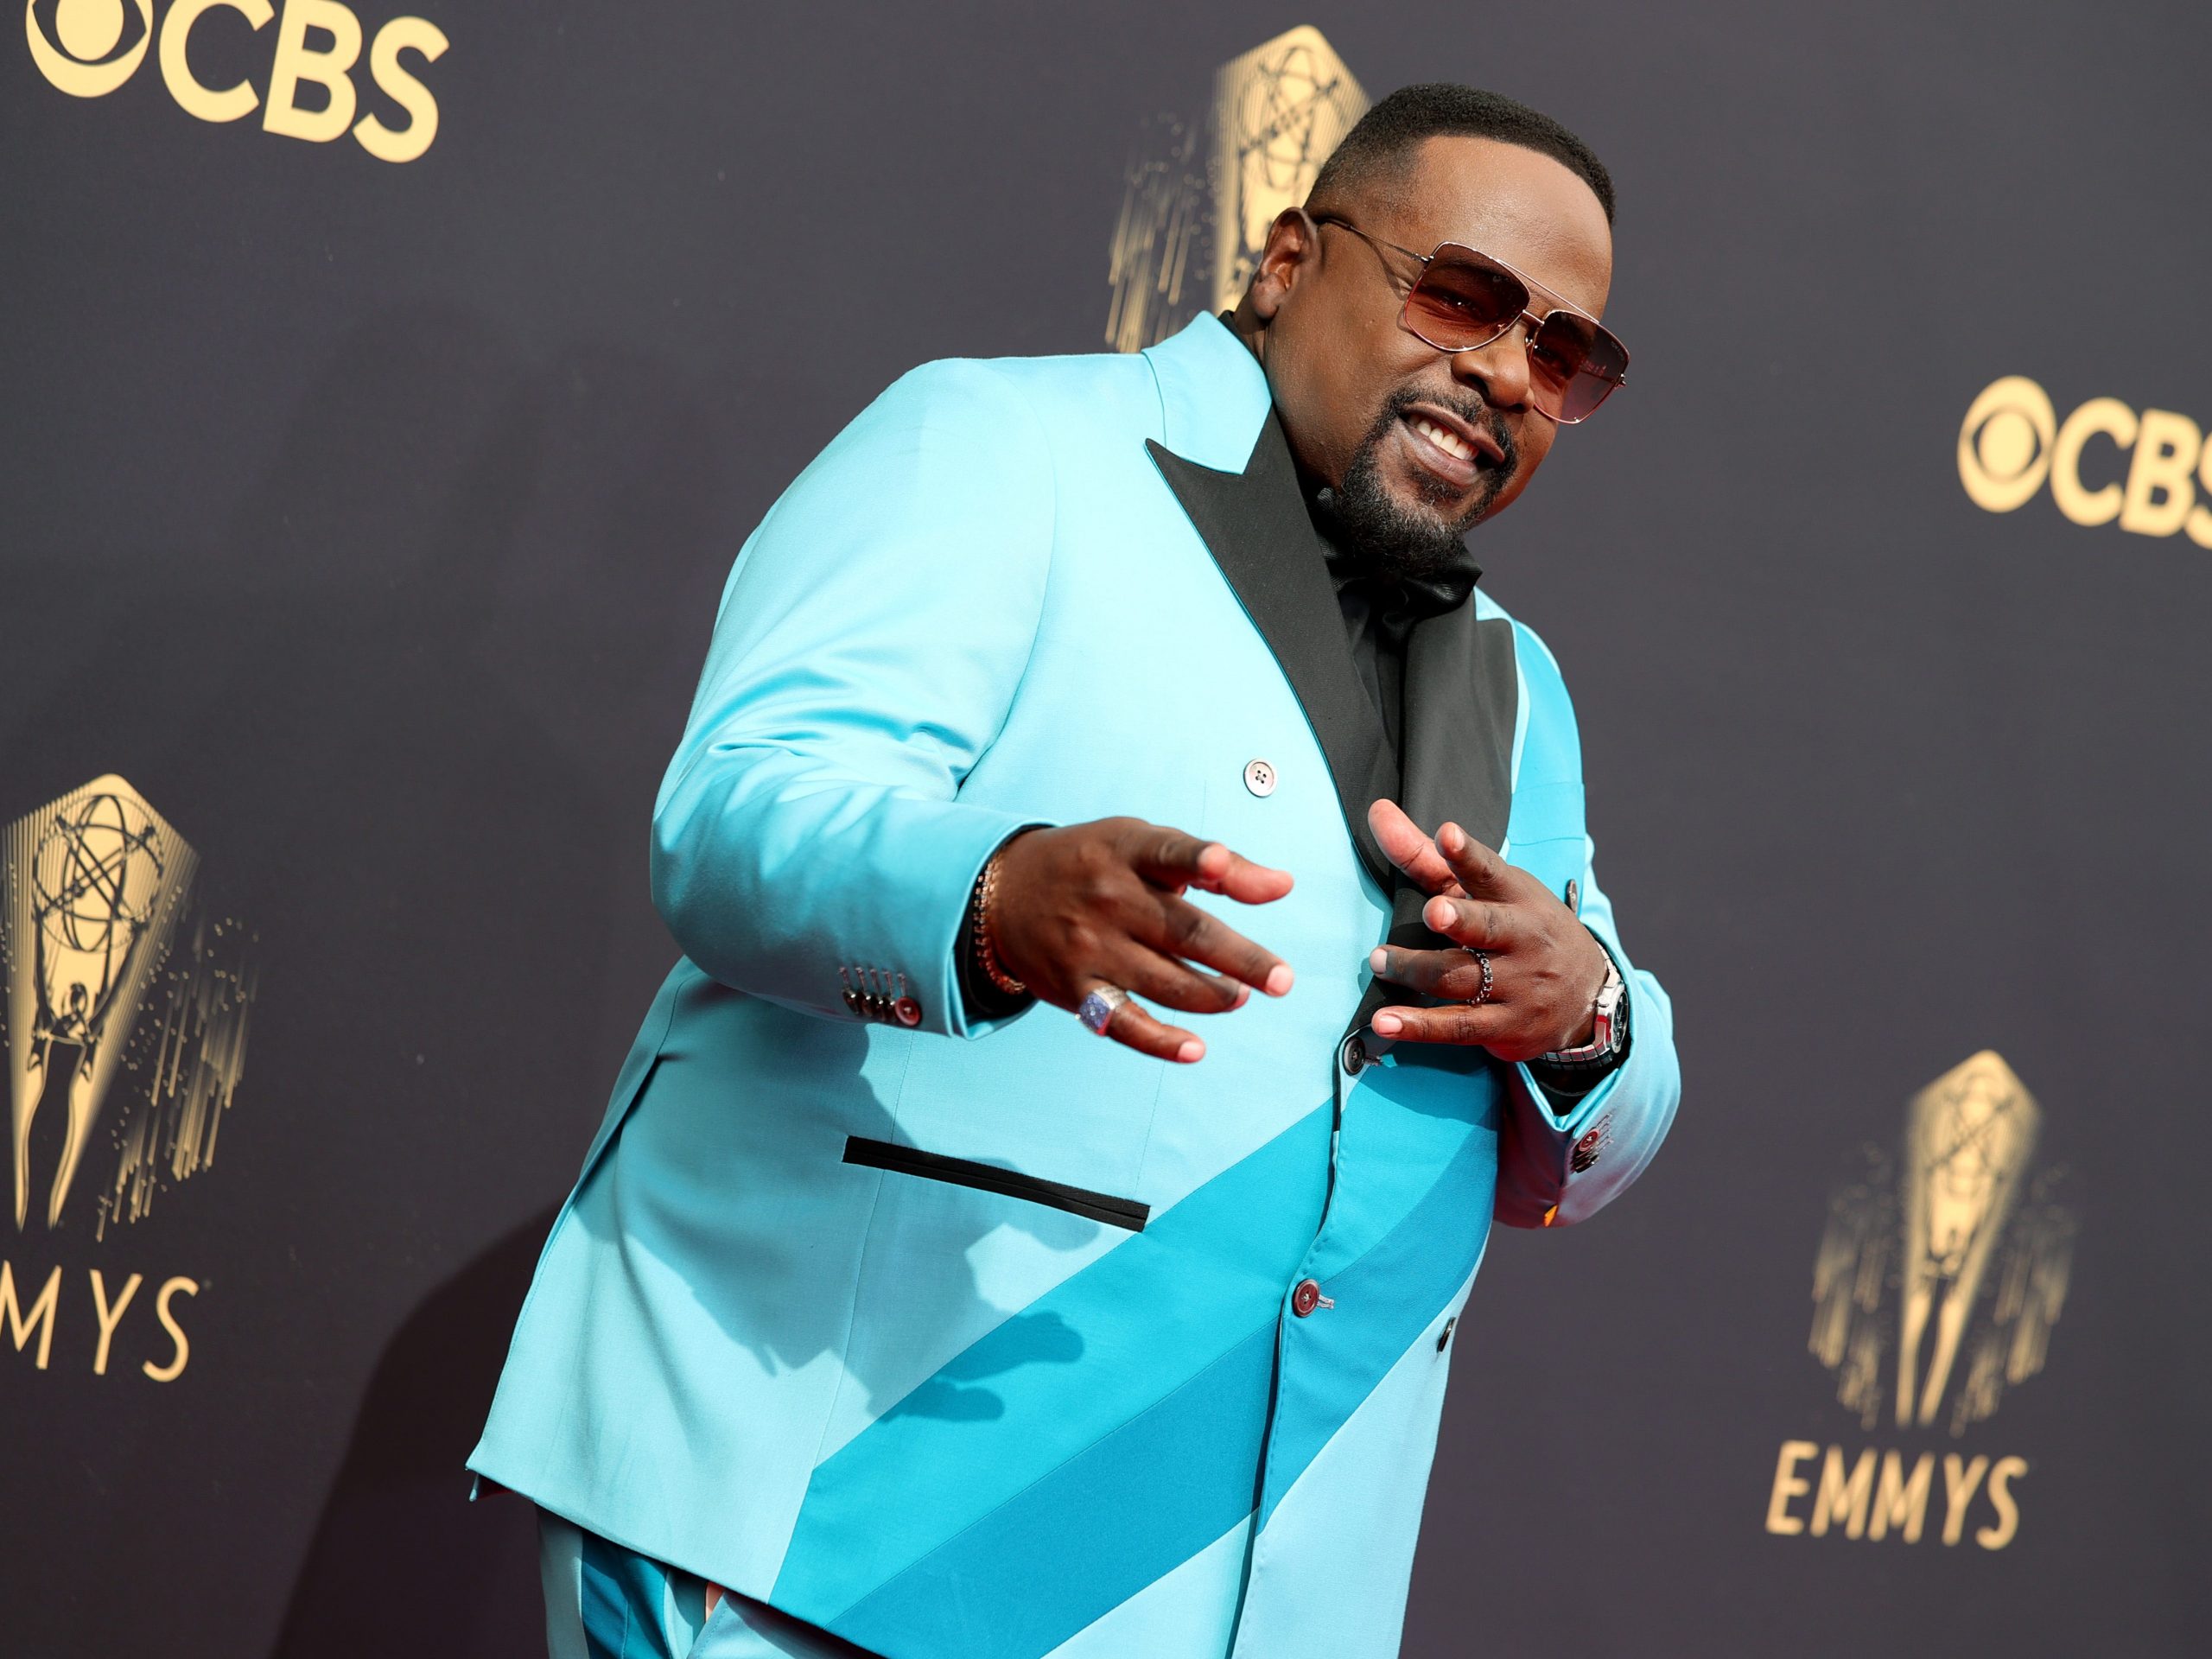 Host Cedric the Entertainer attends the 73rd Primetime Emmy Awards at L.A. LIVE on September 19, 2021 in Los Angeles, California.